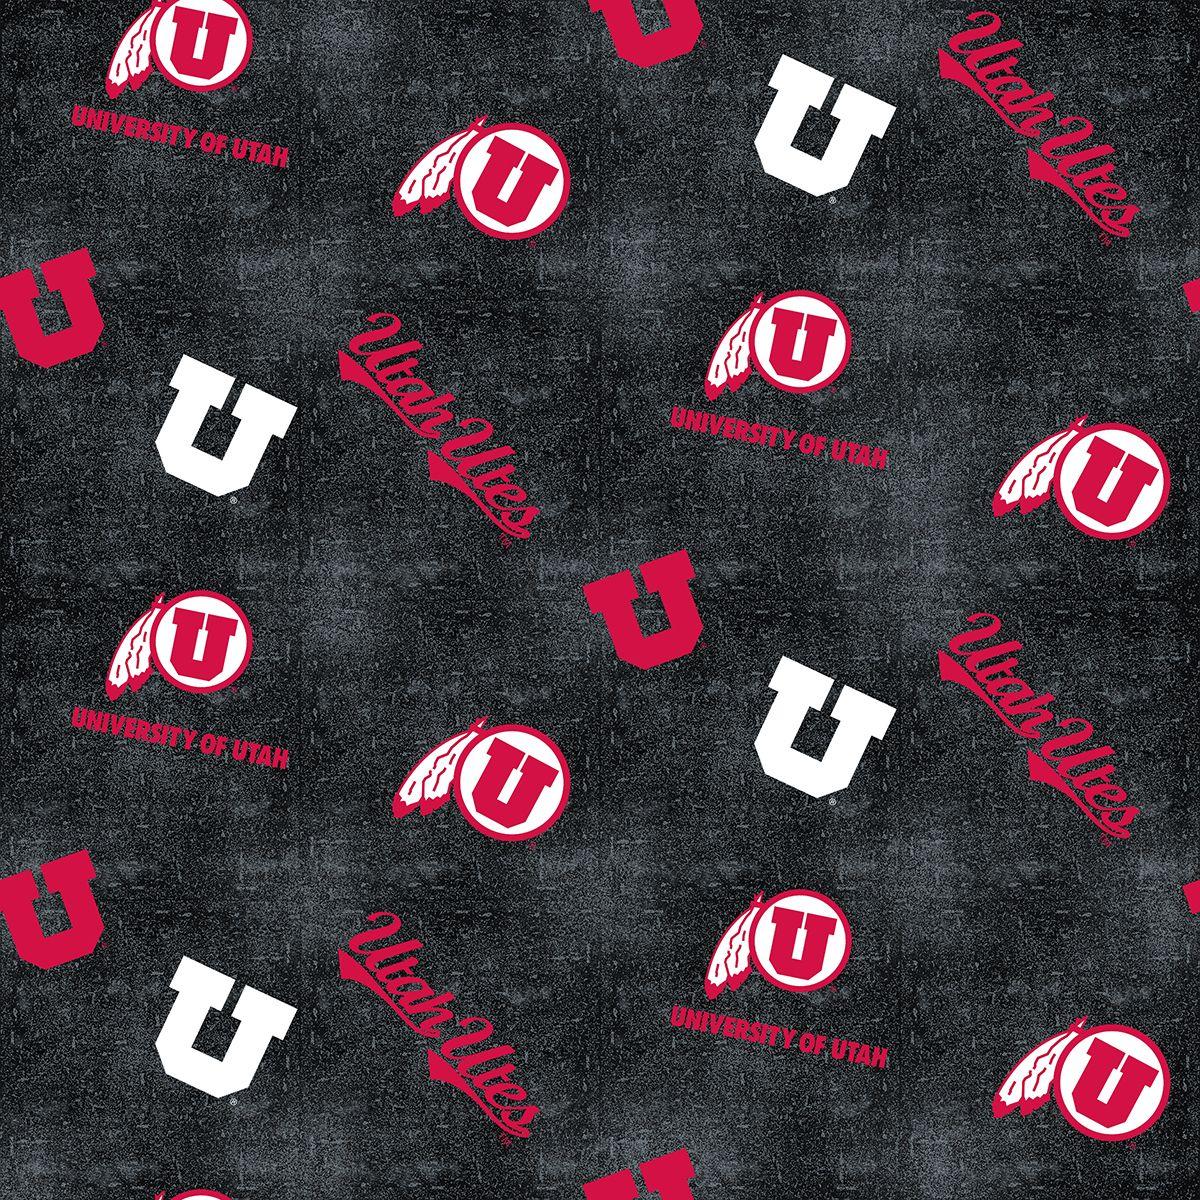 And U of U Mascot Logo - University of Utah Flannel Fabric with Distressed Ground and logo ...